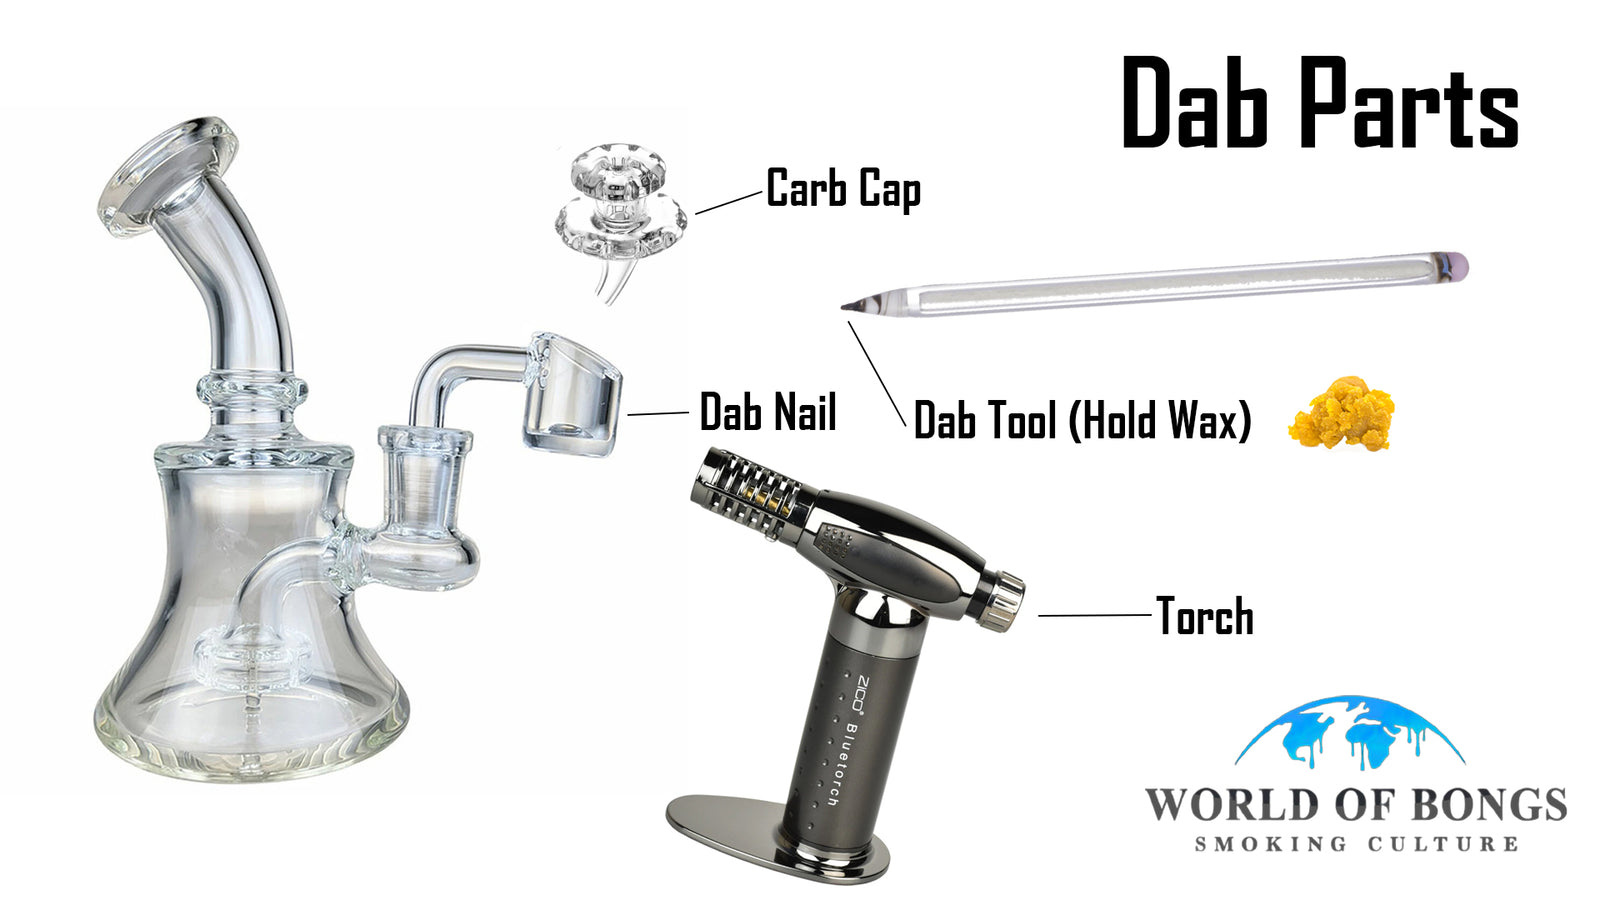 A Guide to Dabbing - Low Price Bud